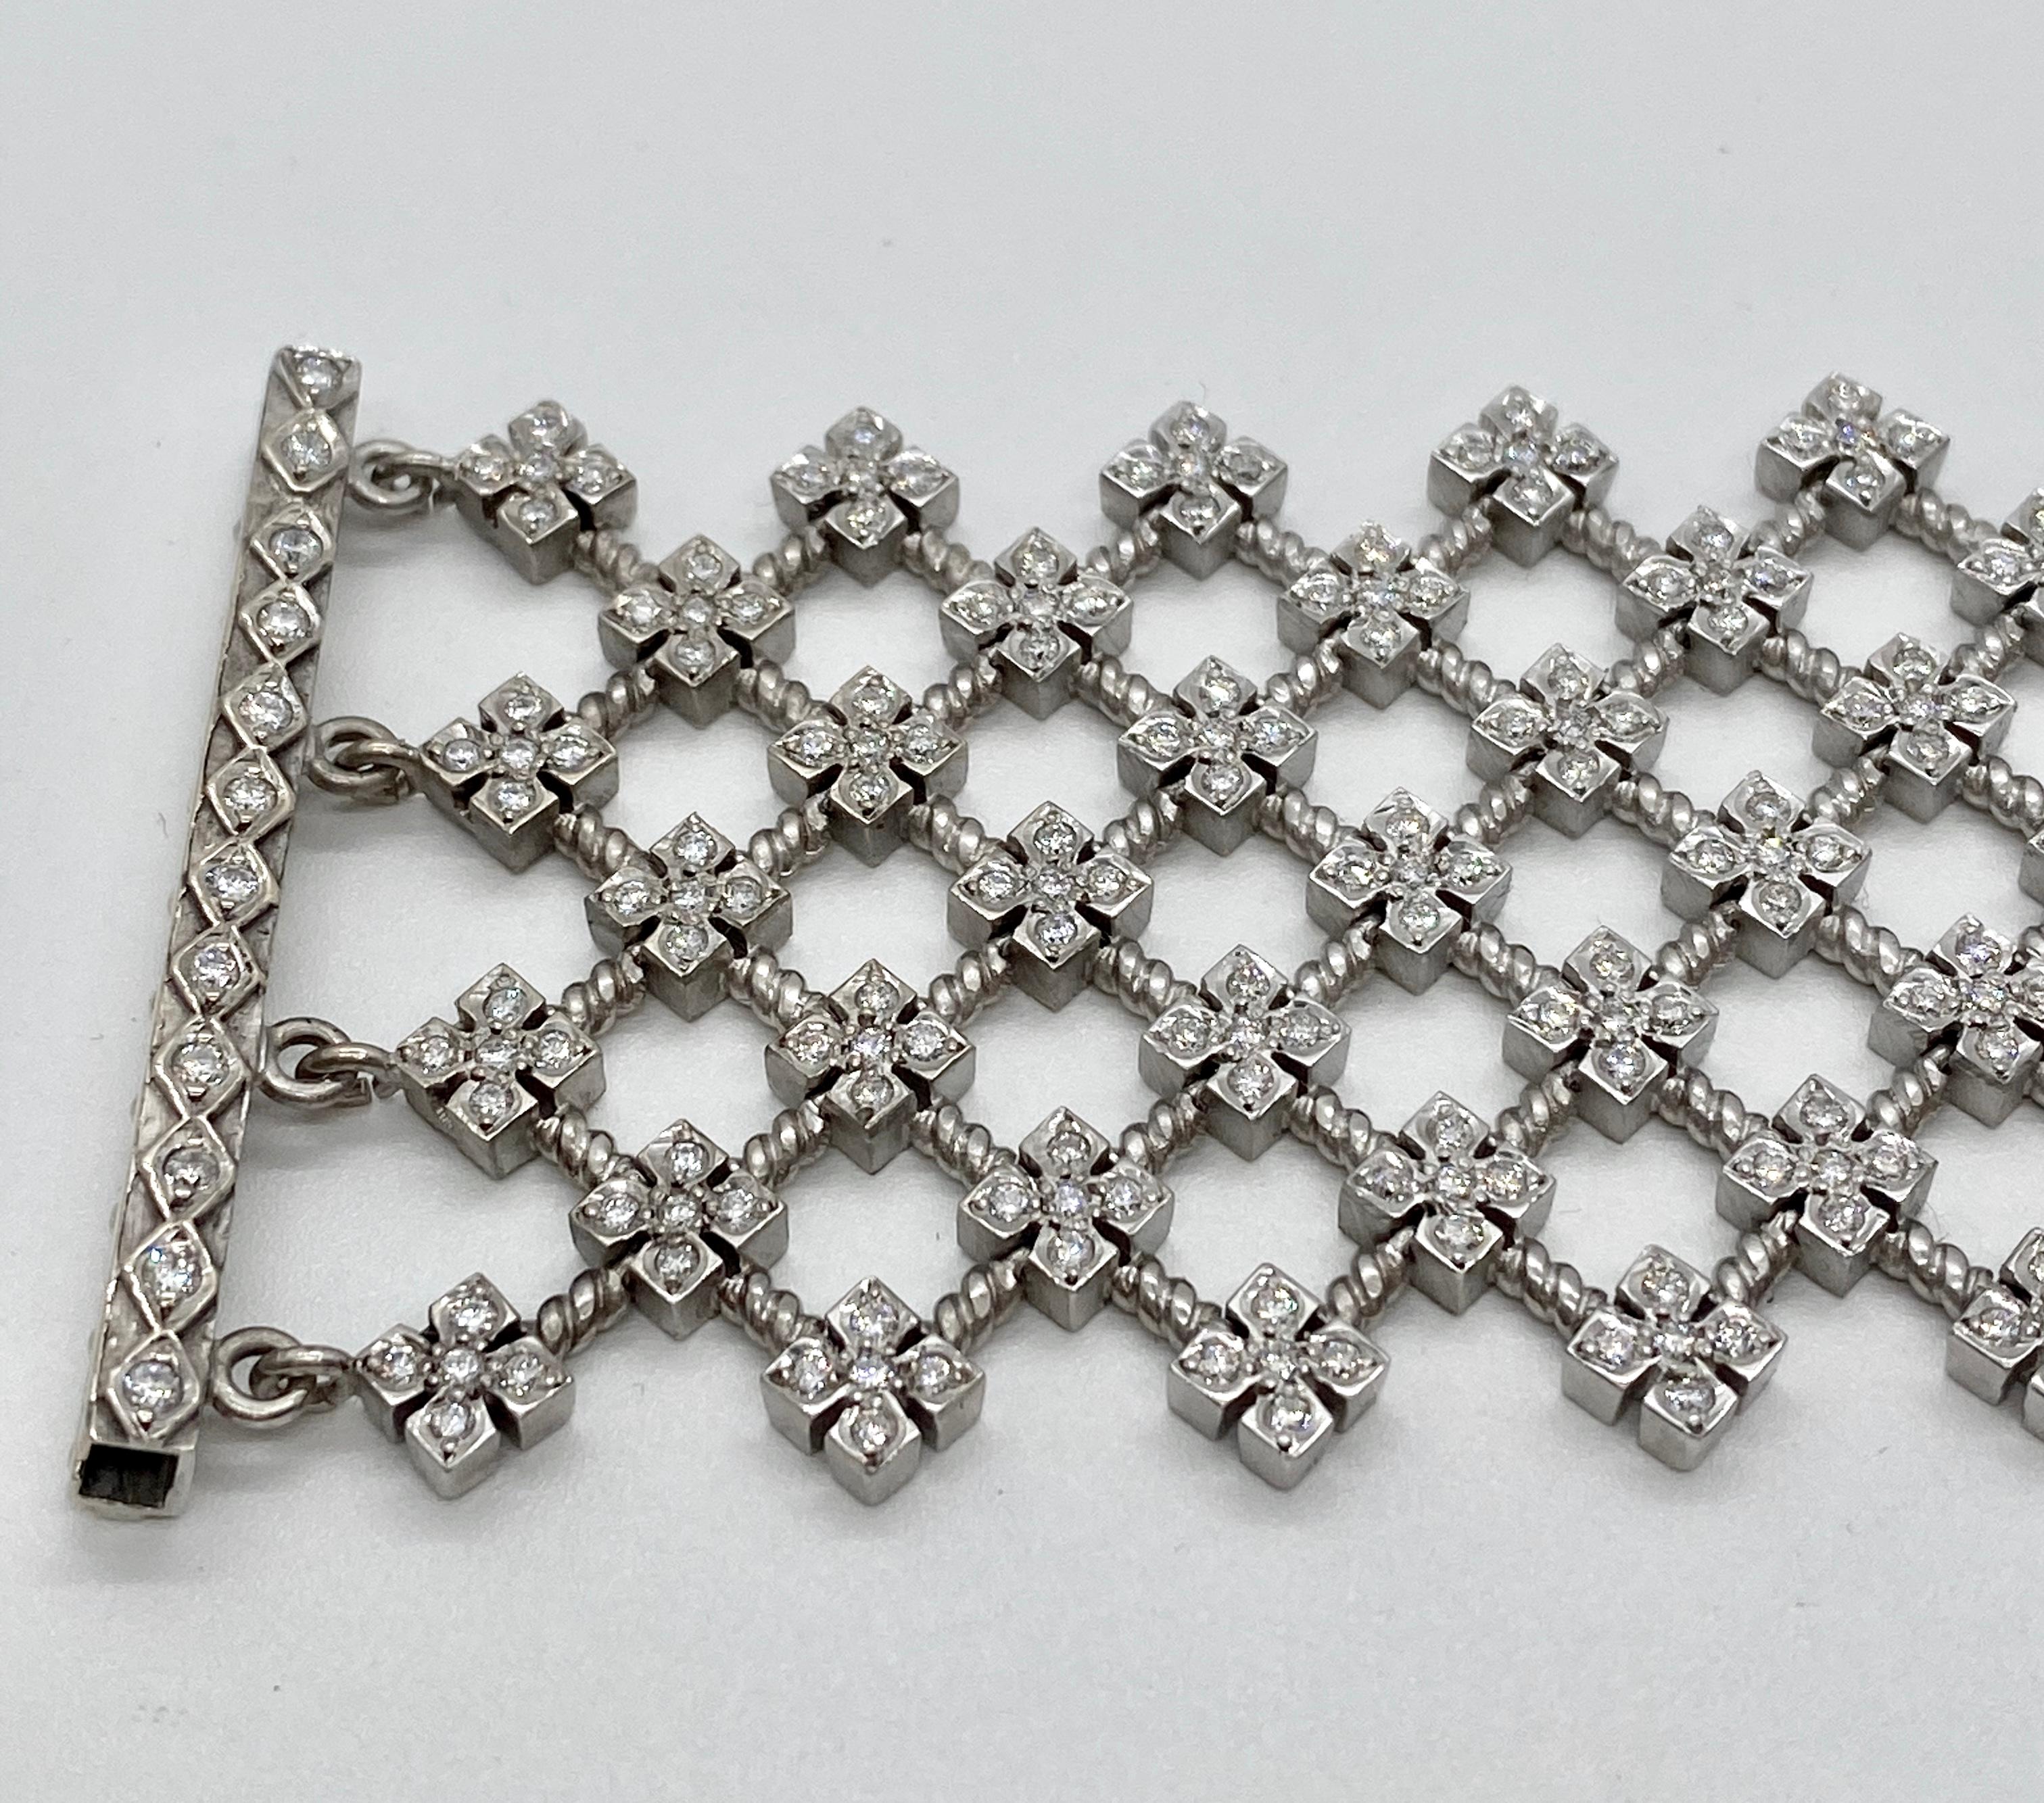 Loree Rodkin 18k white gold diamond cross wide lattice Gothic style bracelet.  Bracelet measure 1.75 inches wide and is 6.5 inches in length.  Diamonds are round brilliant cut and weigh approximately 4.00 carat total weight and are G-H in color and